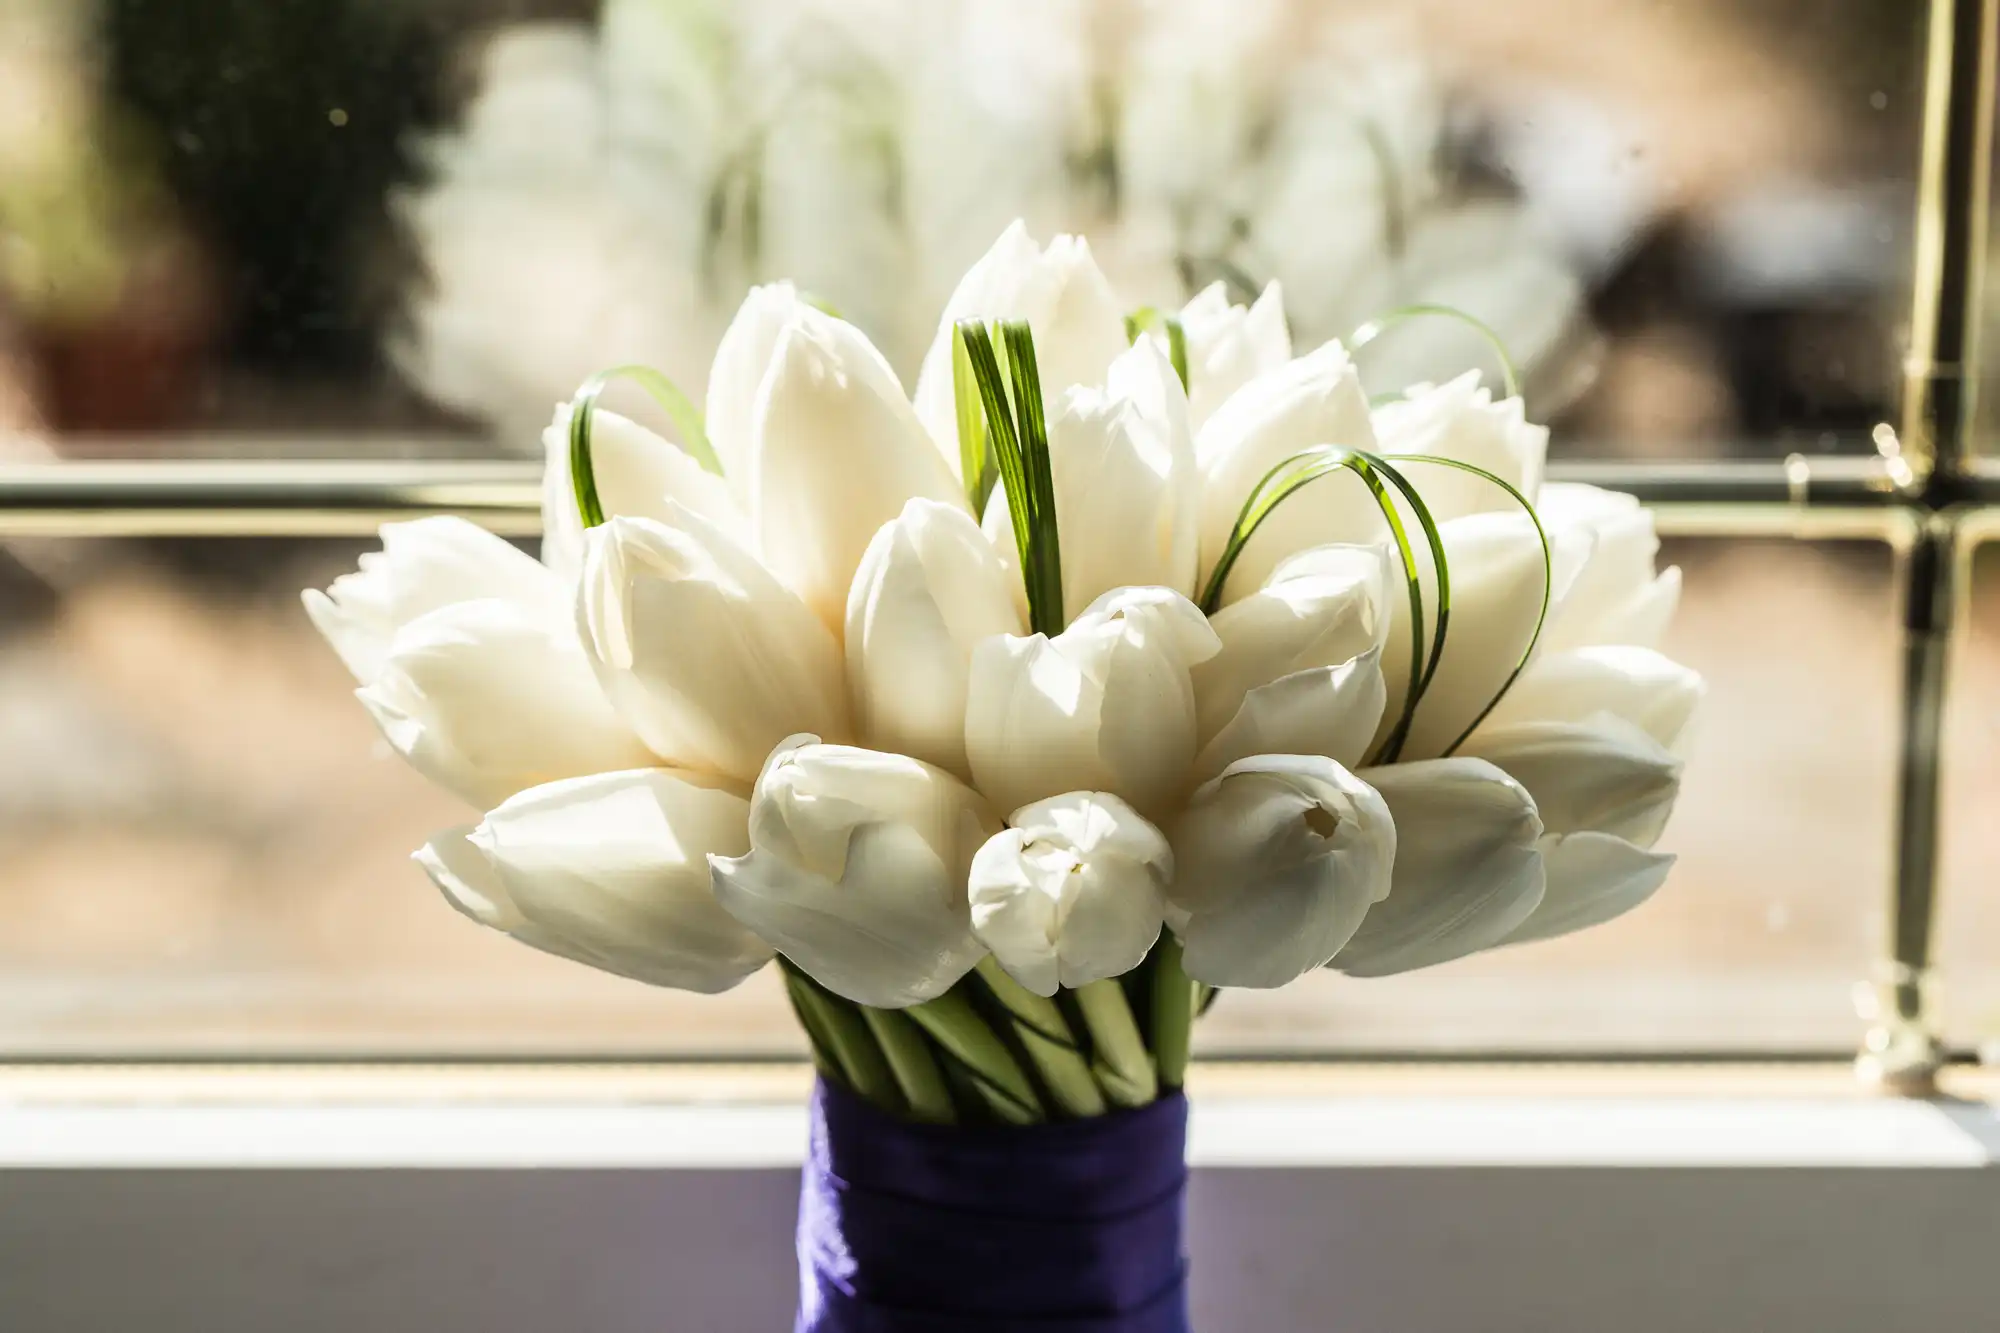 A bouquet of white tulips bound with a purple ribbon, positioned on a windowsill against a blurry background.